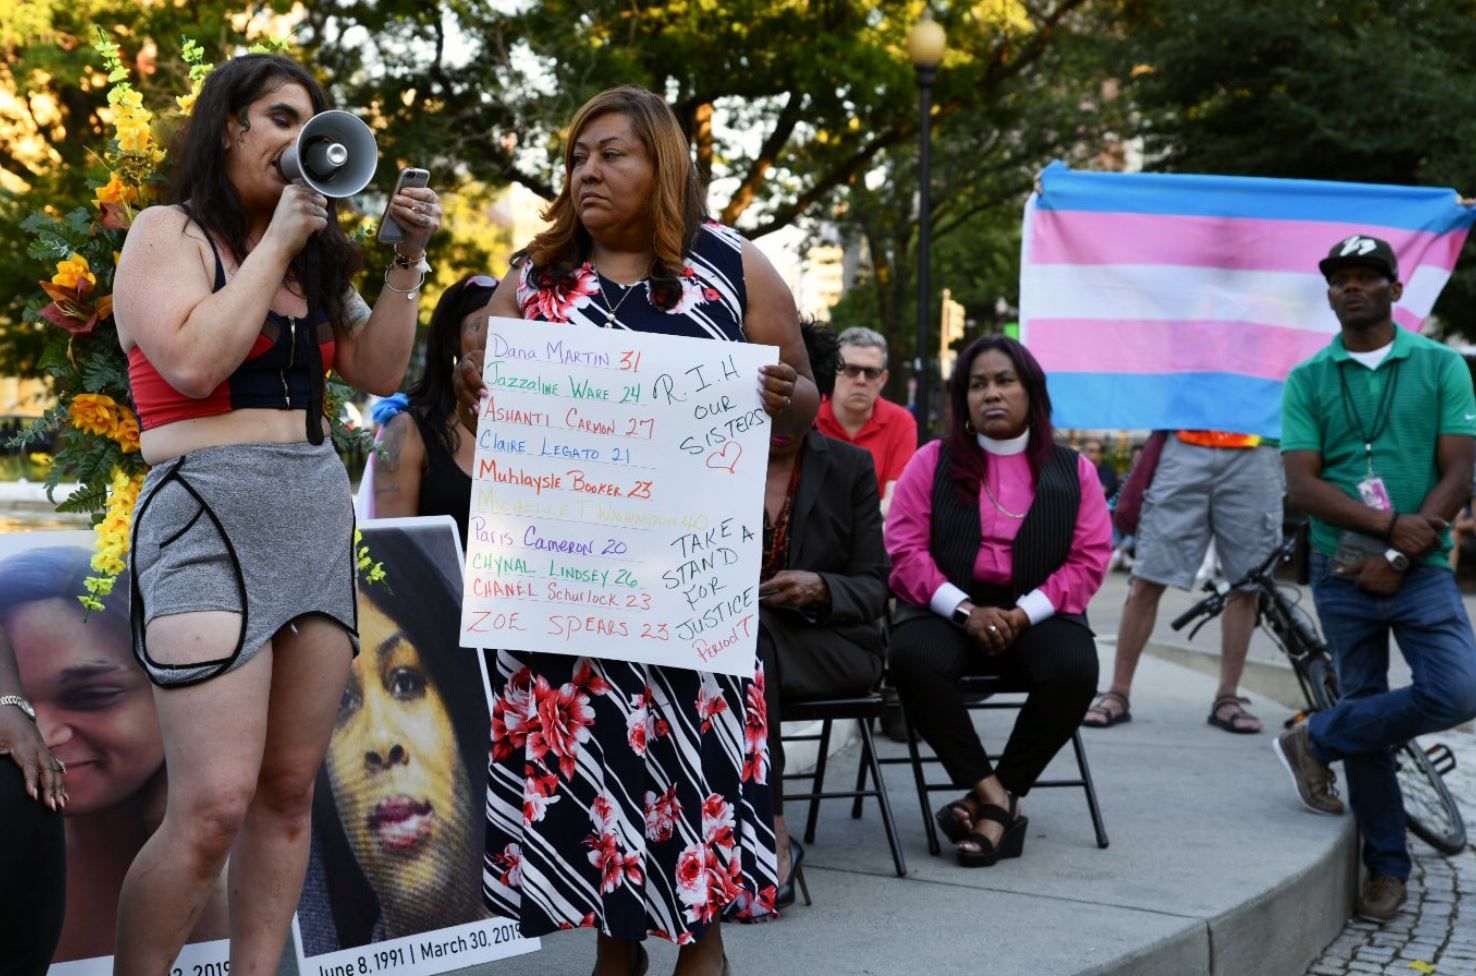 On Friday, June 21, 2019, a speaker recounts her experience with violence as a member of the LGBTQ community. (WTOP/Alejandro Alvarez)